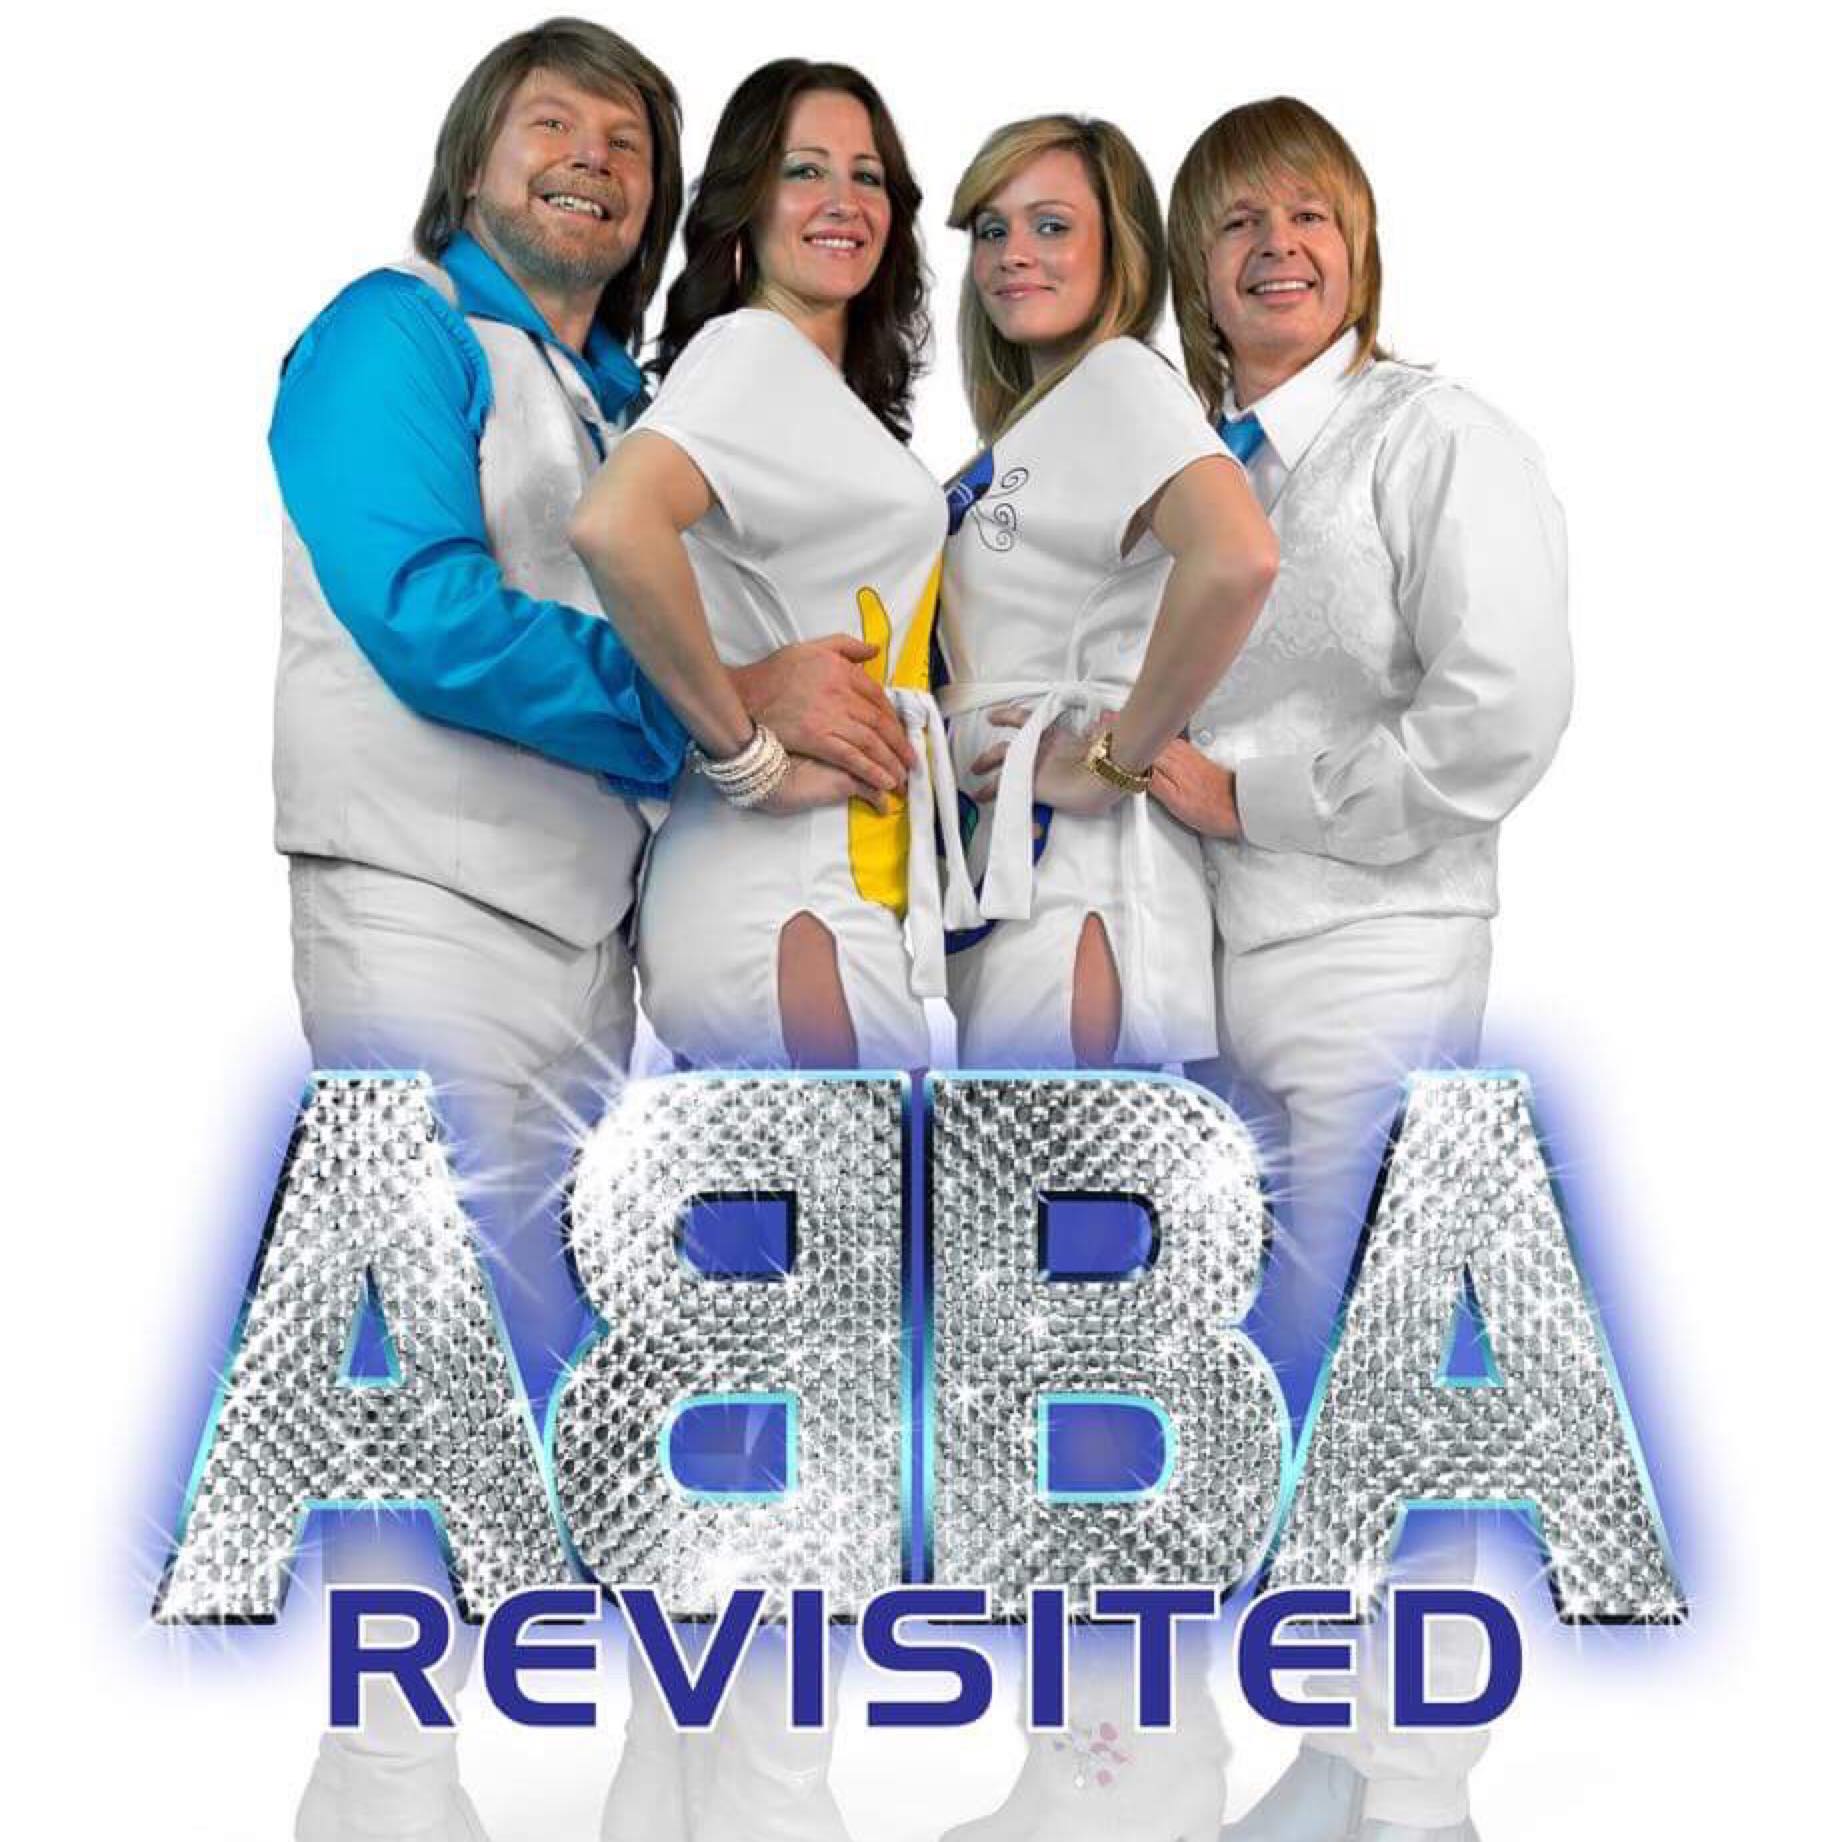 Abba concert poster with image of tribute act.